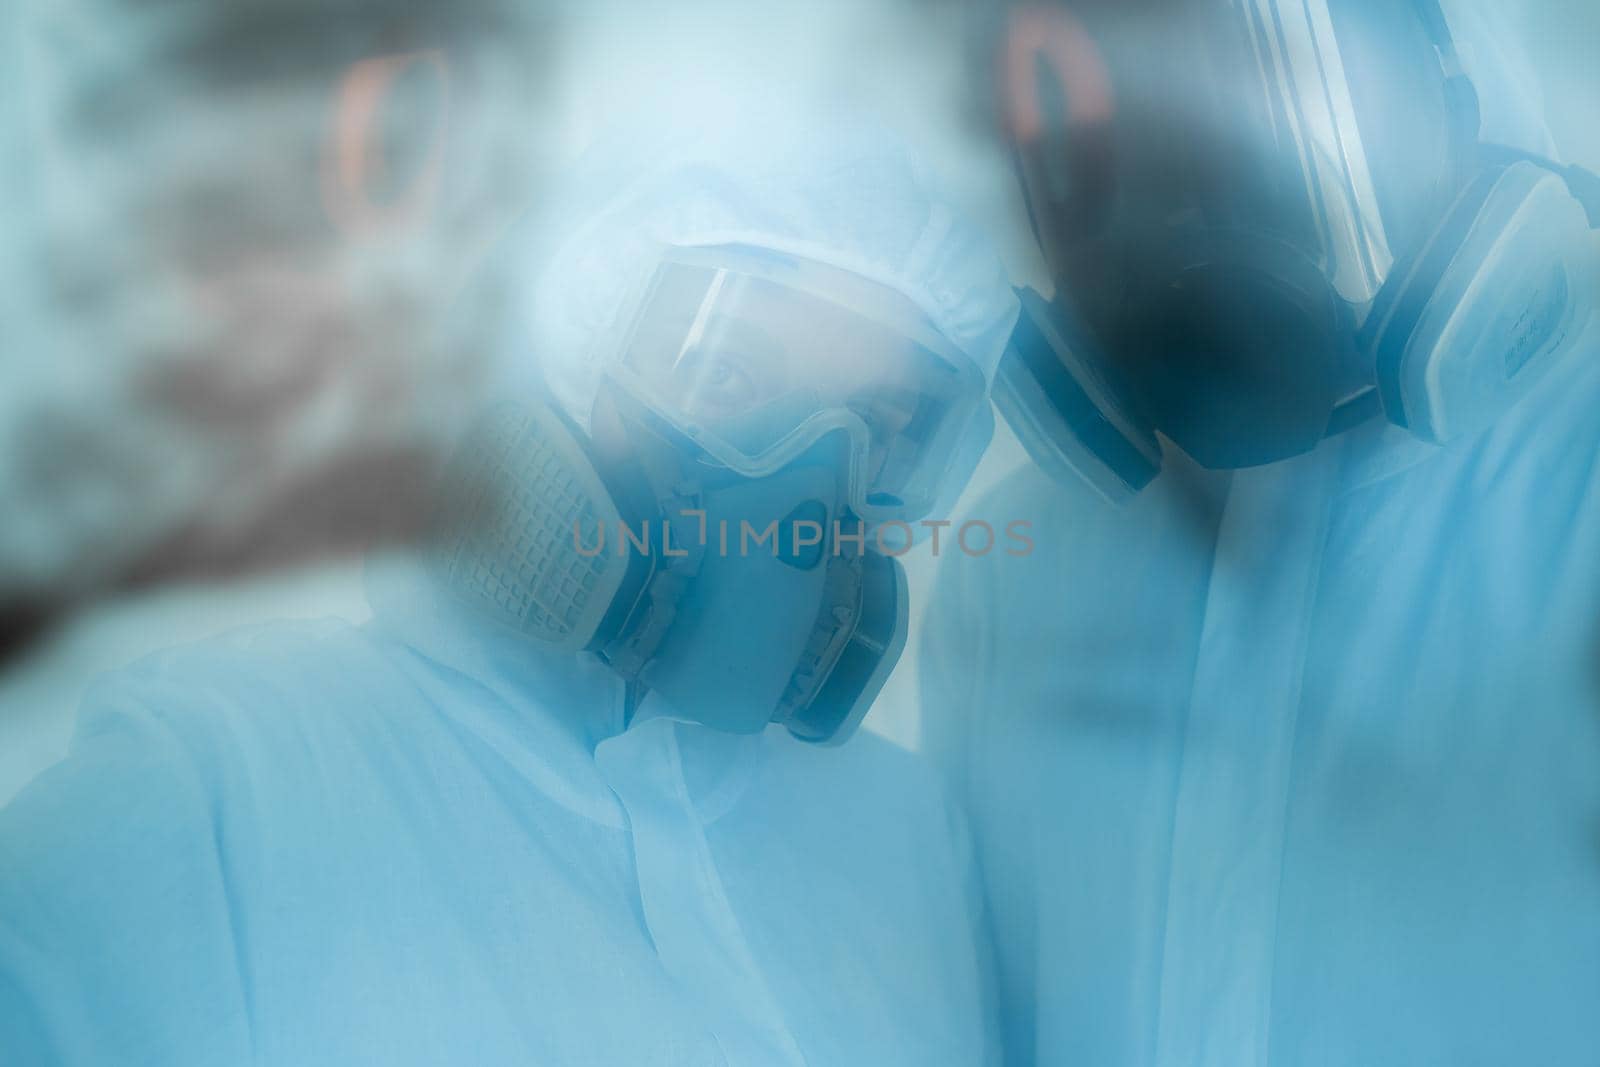 Epidemiologists in respirators examine the patient's pneumonia on a radiograph Covid-19. Concept of coronavirus by StudioPeace